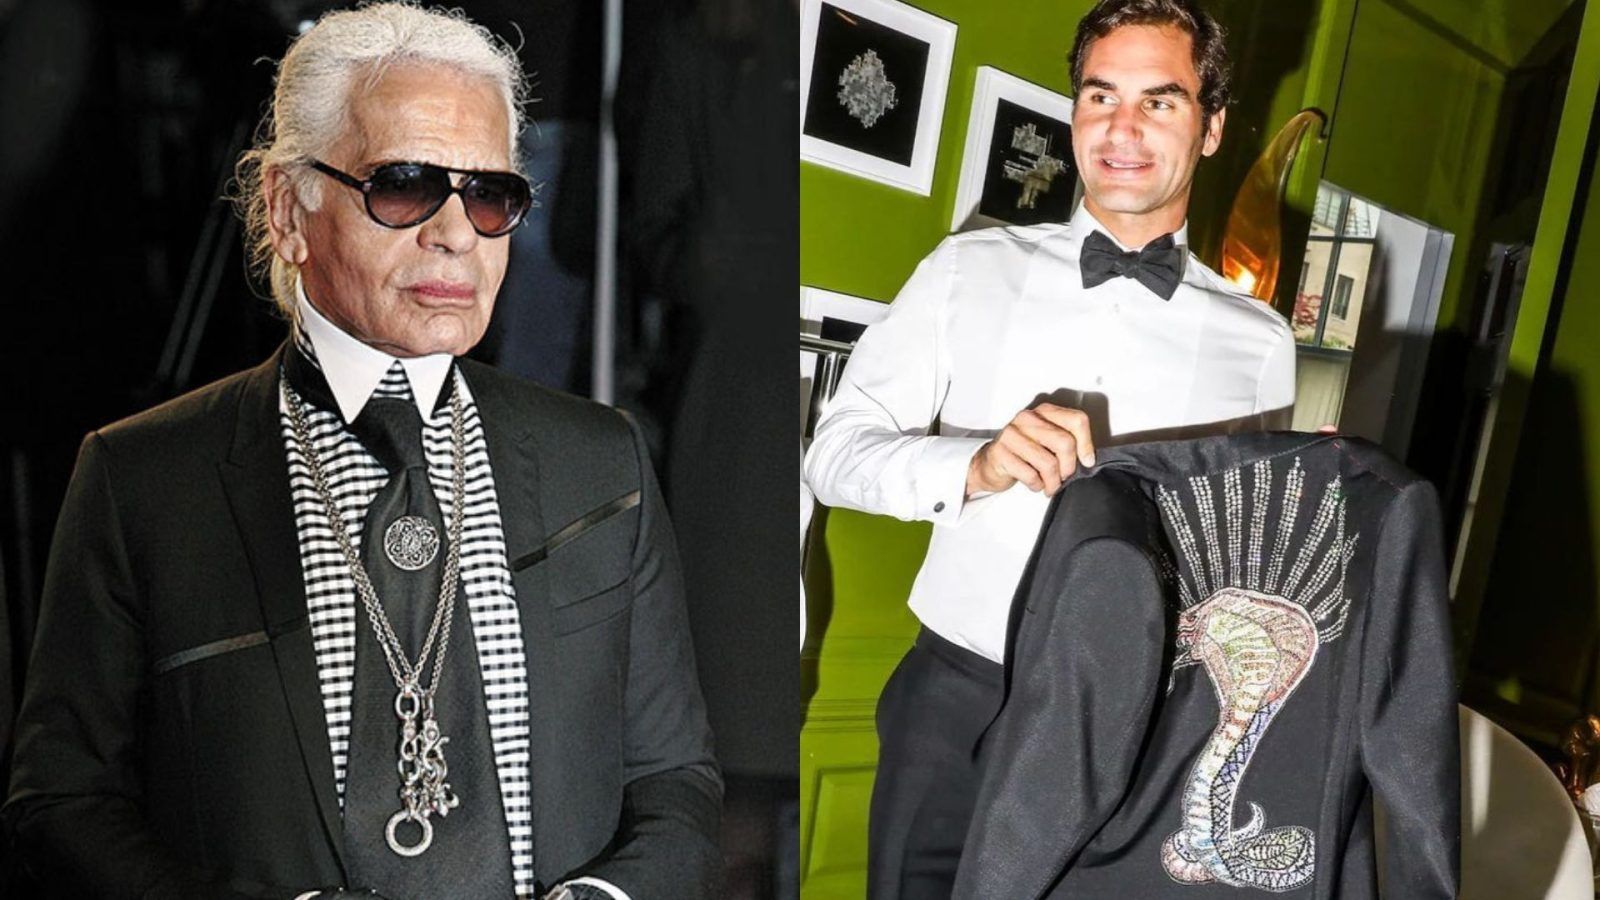 The 2023 'Karl Lagerfeld' Met Gala's celebrity co-chairs, revealed: Dua  Lipa, Roger Federer, Penelope Cruz and Michaela Coel will present the  prestigious event alongside Anna Wintour this May